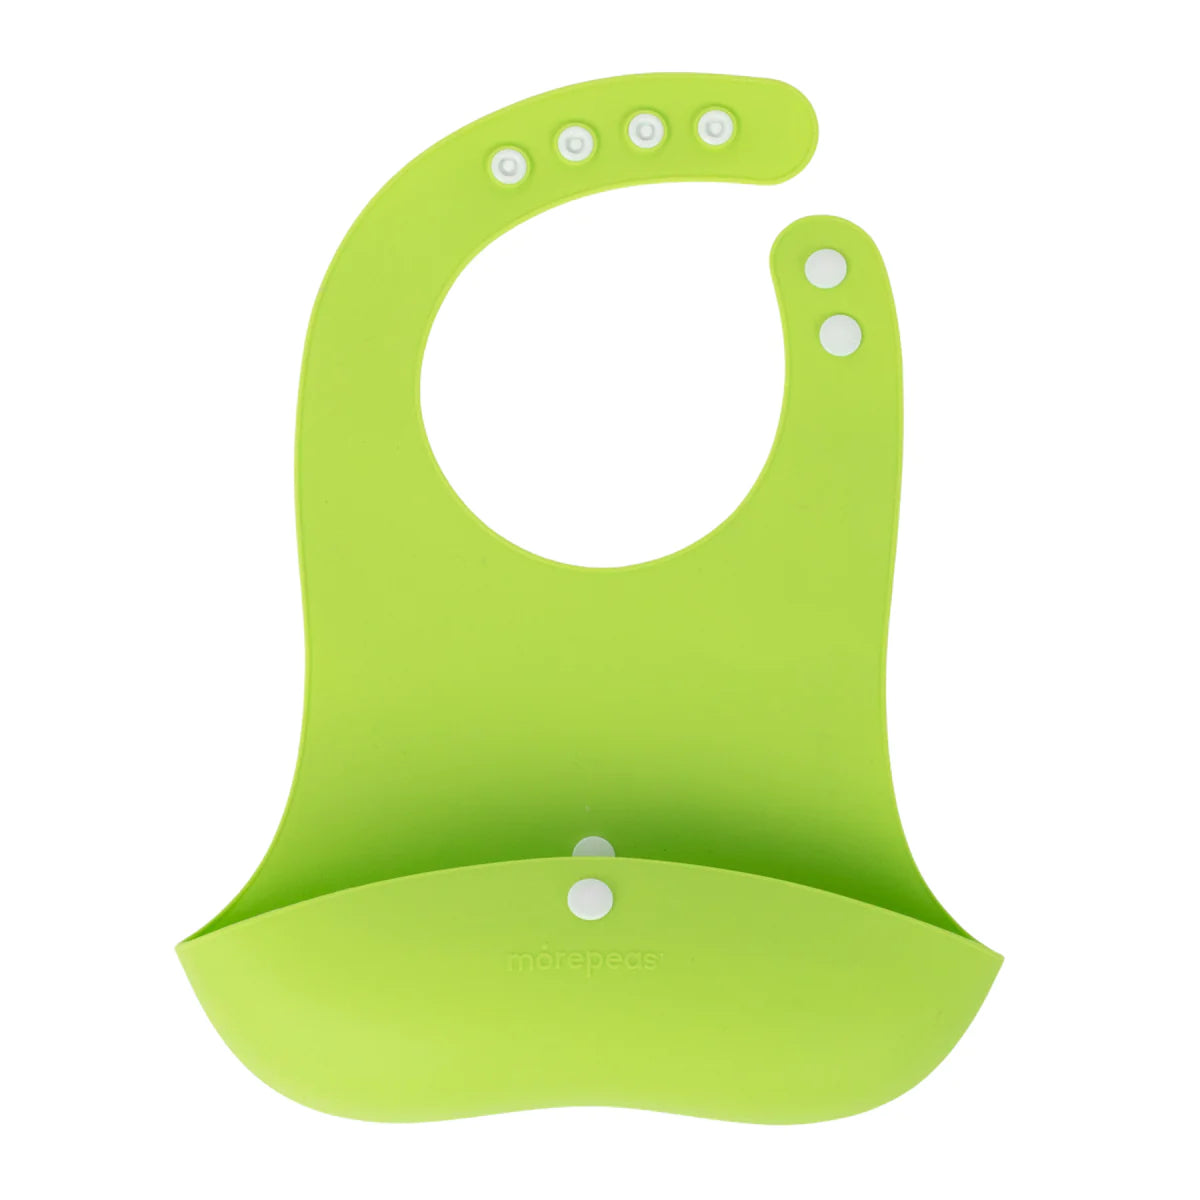 Morepeas roll and snap silicone bib green sweet pea